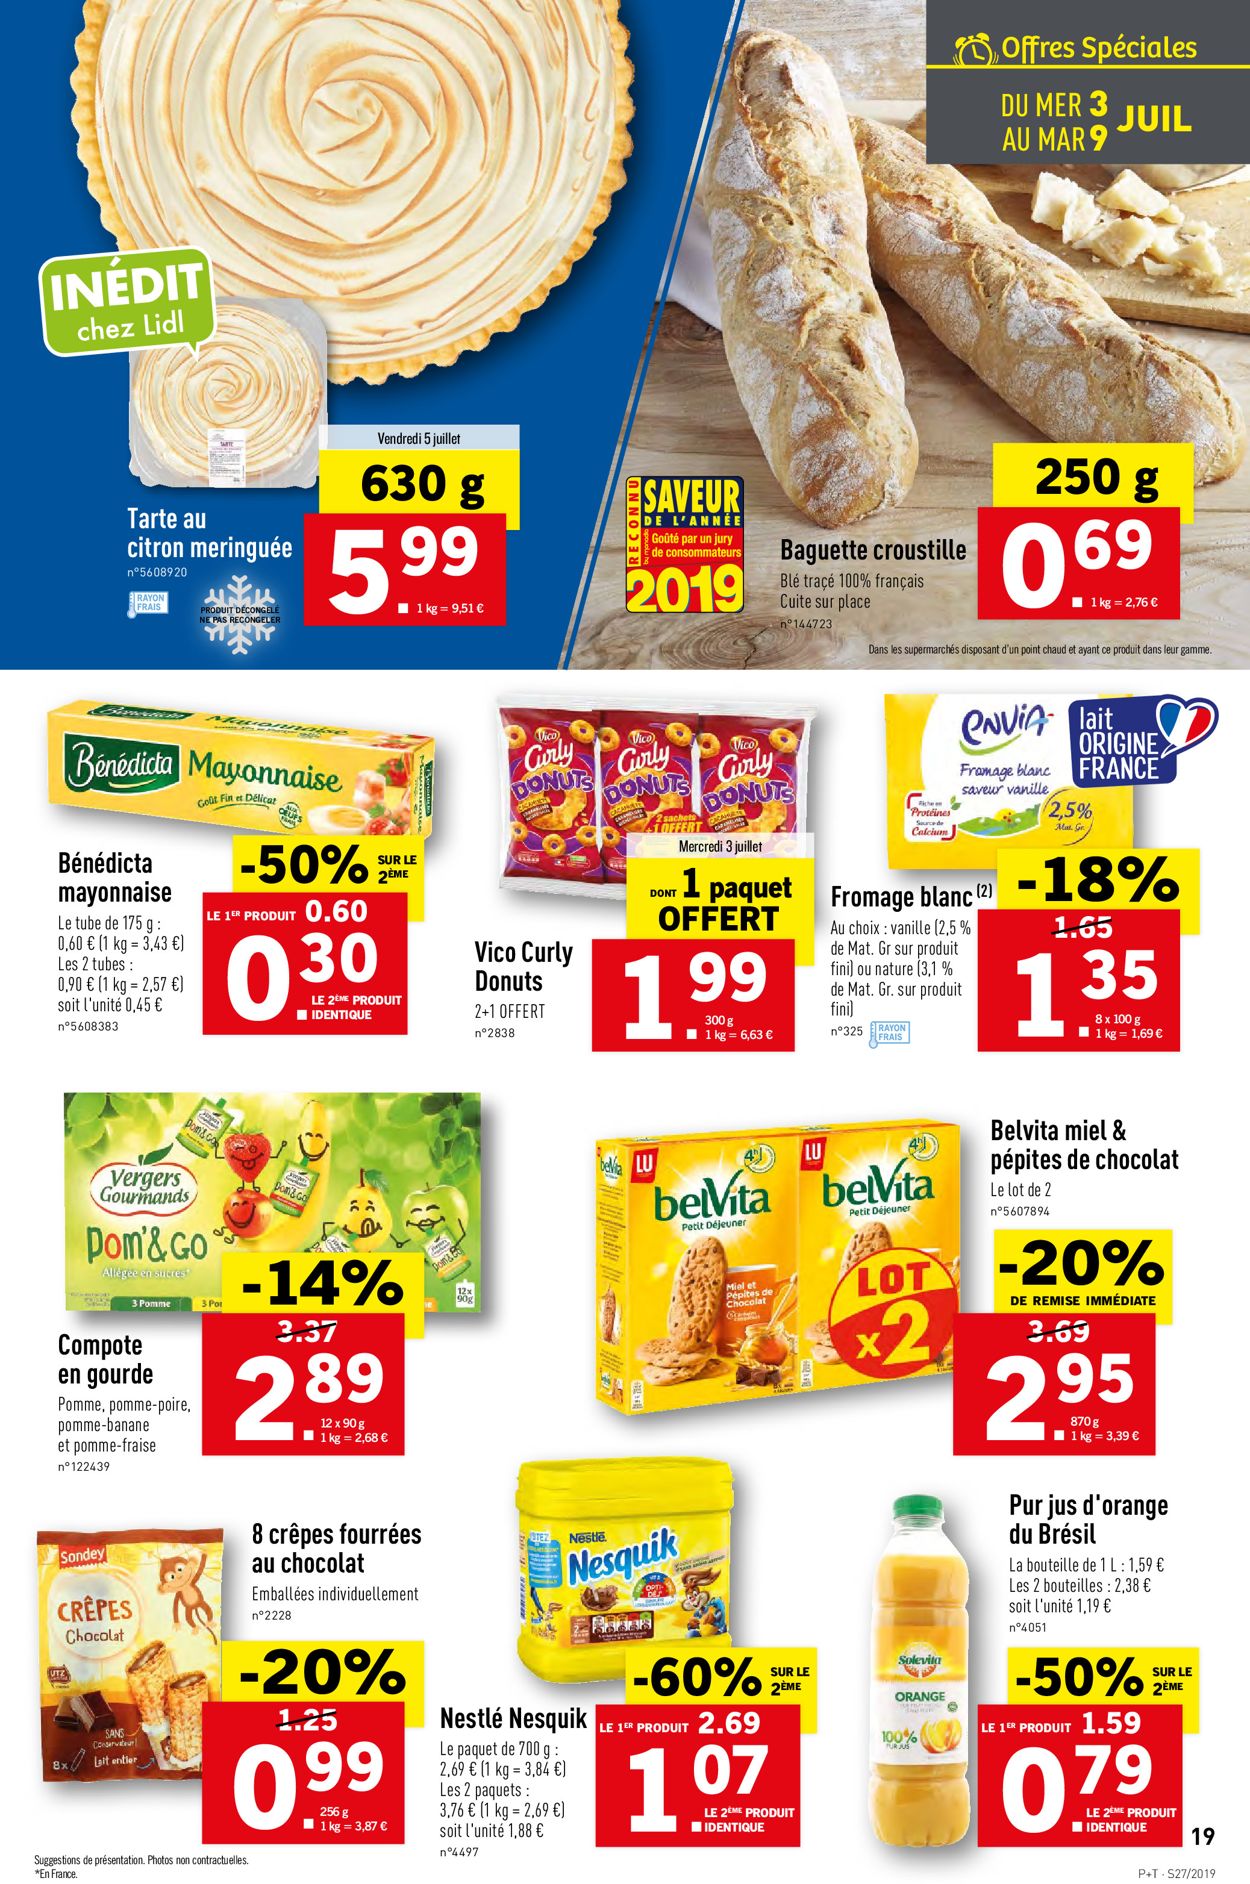 Lidl Catalogue - 03.07-09.07.2019 (Page 19)